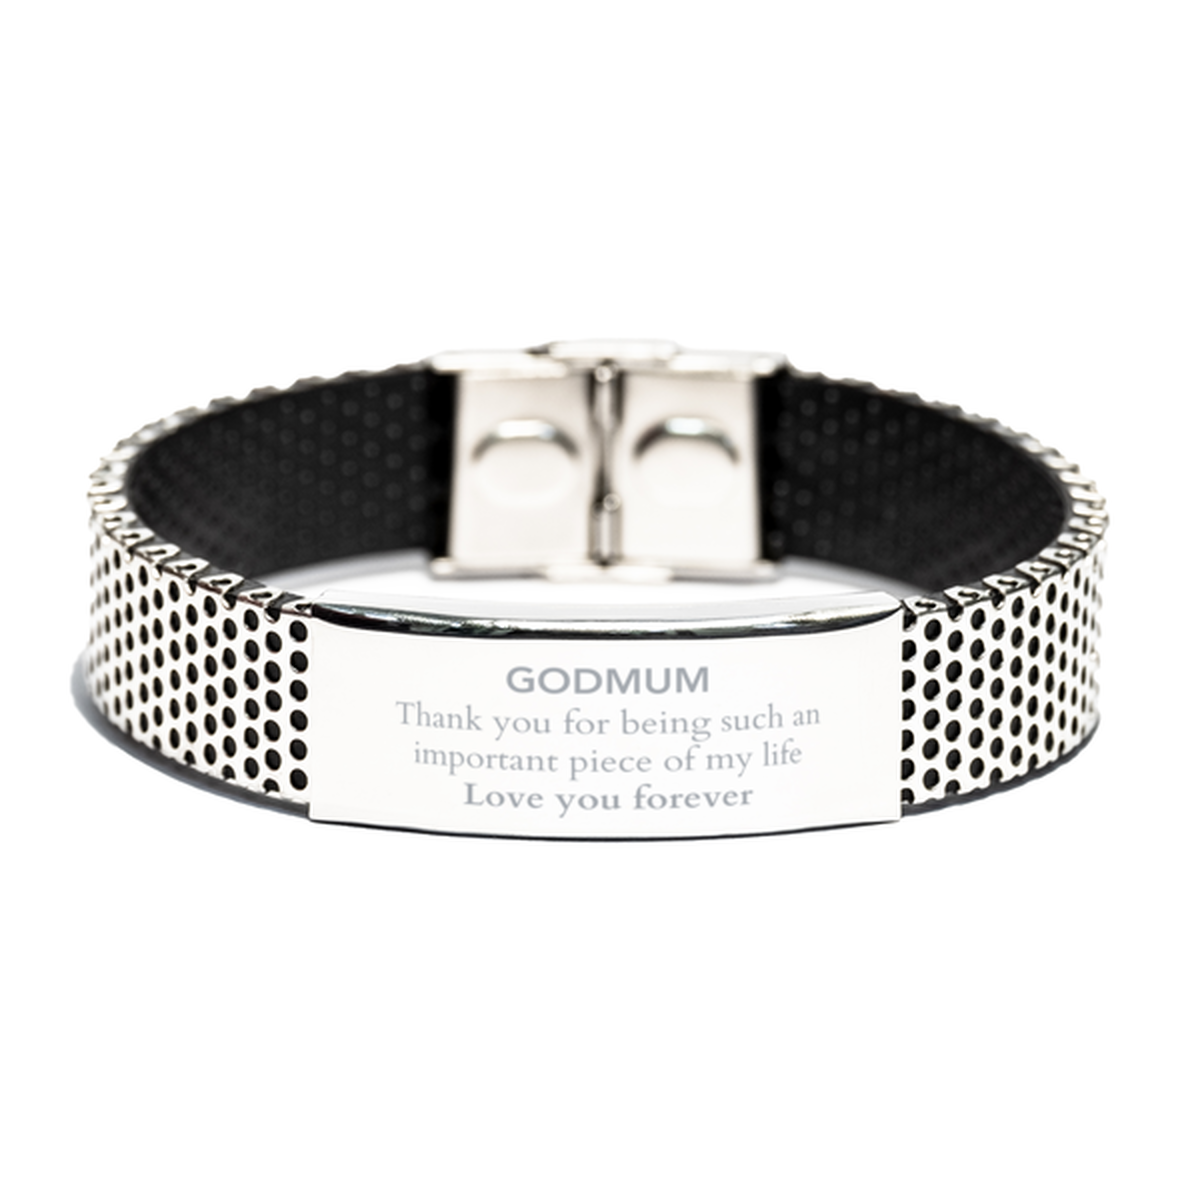 Appropriate Godmum Stainless Steel Bracelet Epic Birthday Gifts for Godmum Thank you for being such an important piece of my life Godmum Christmas Mothers Fathers Day